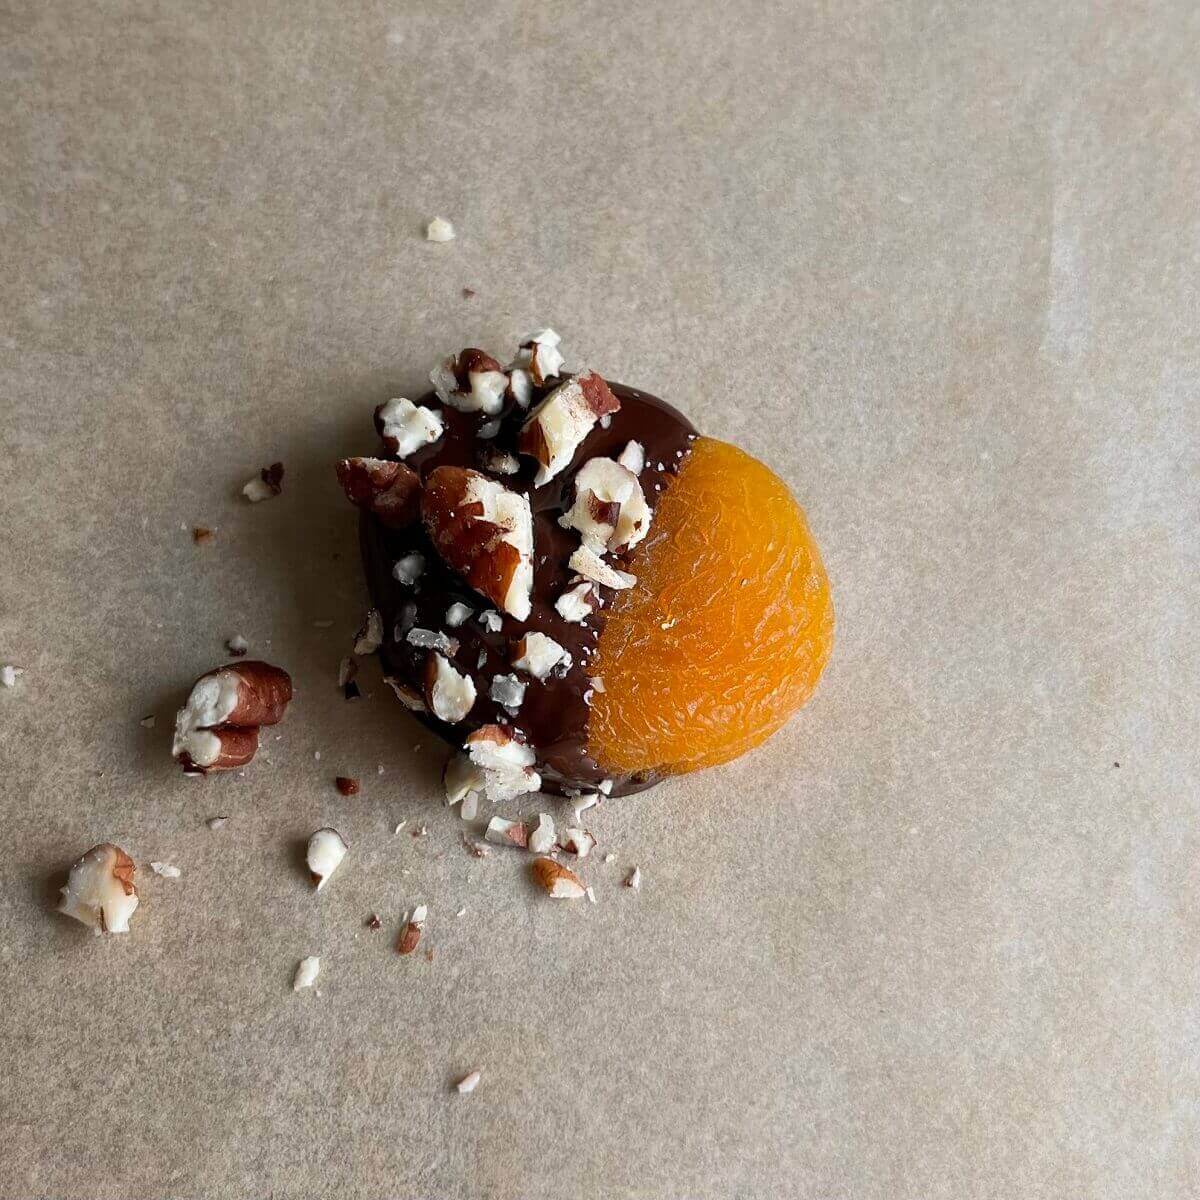 A dried apricot dipped in chocolate and sprinkled with chopped pecans.